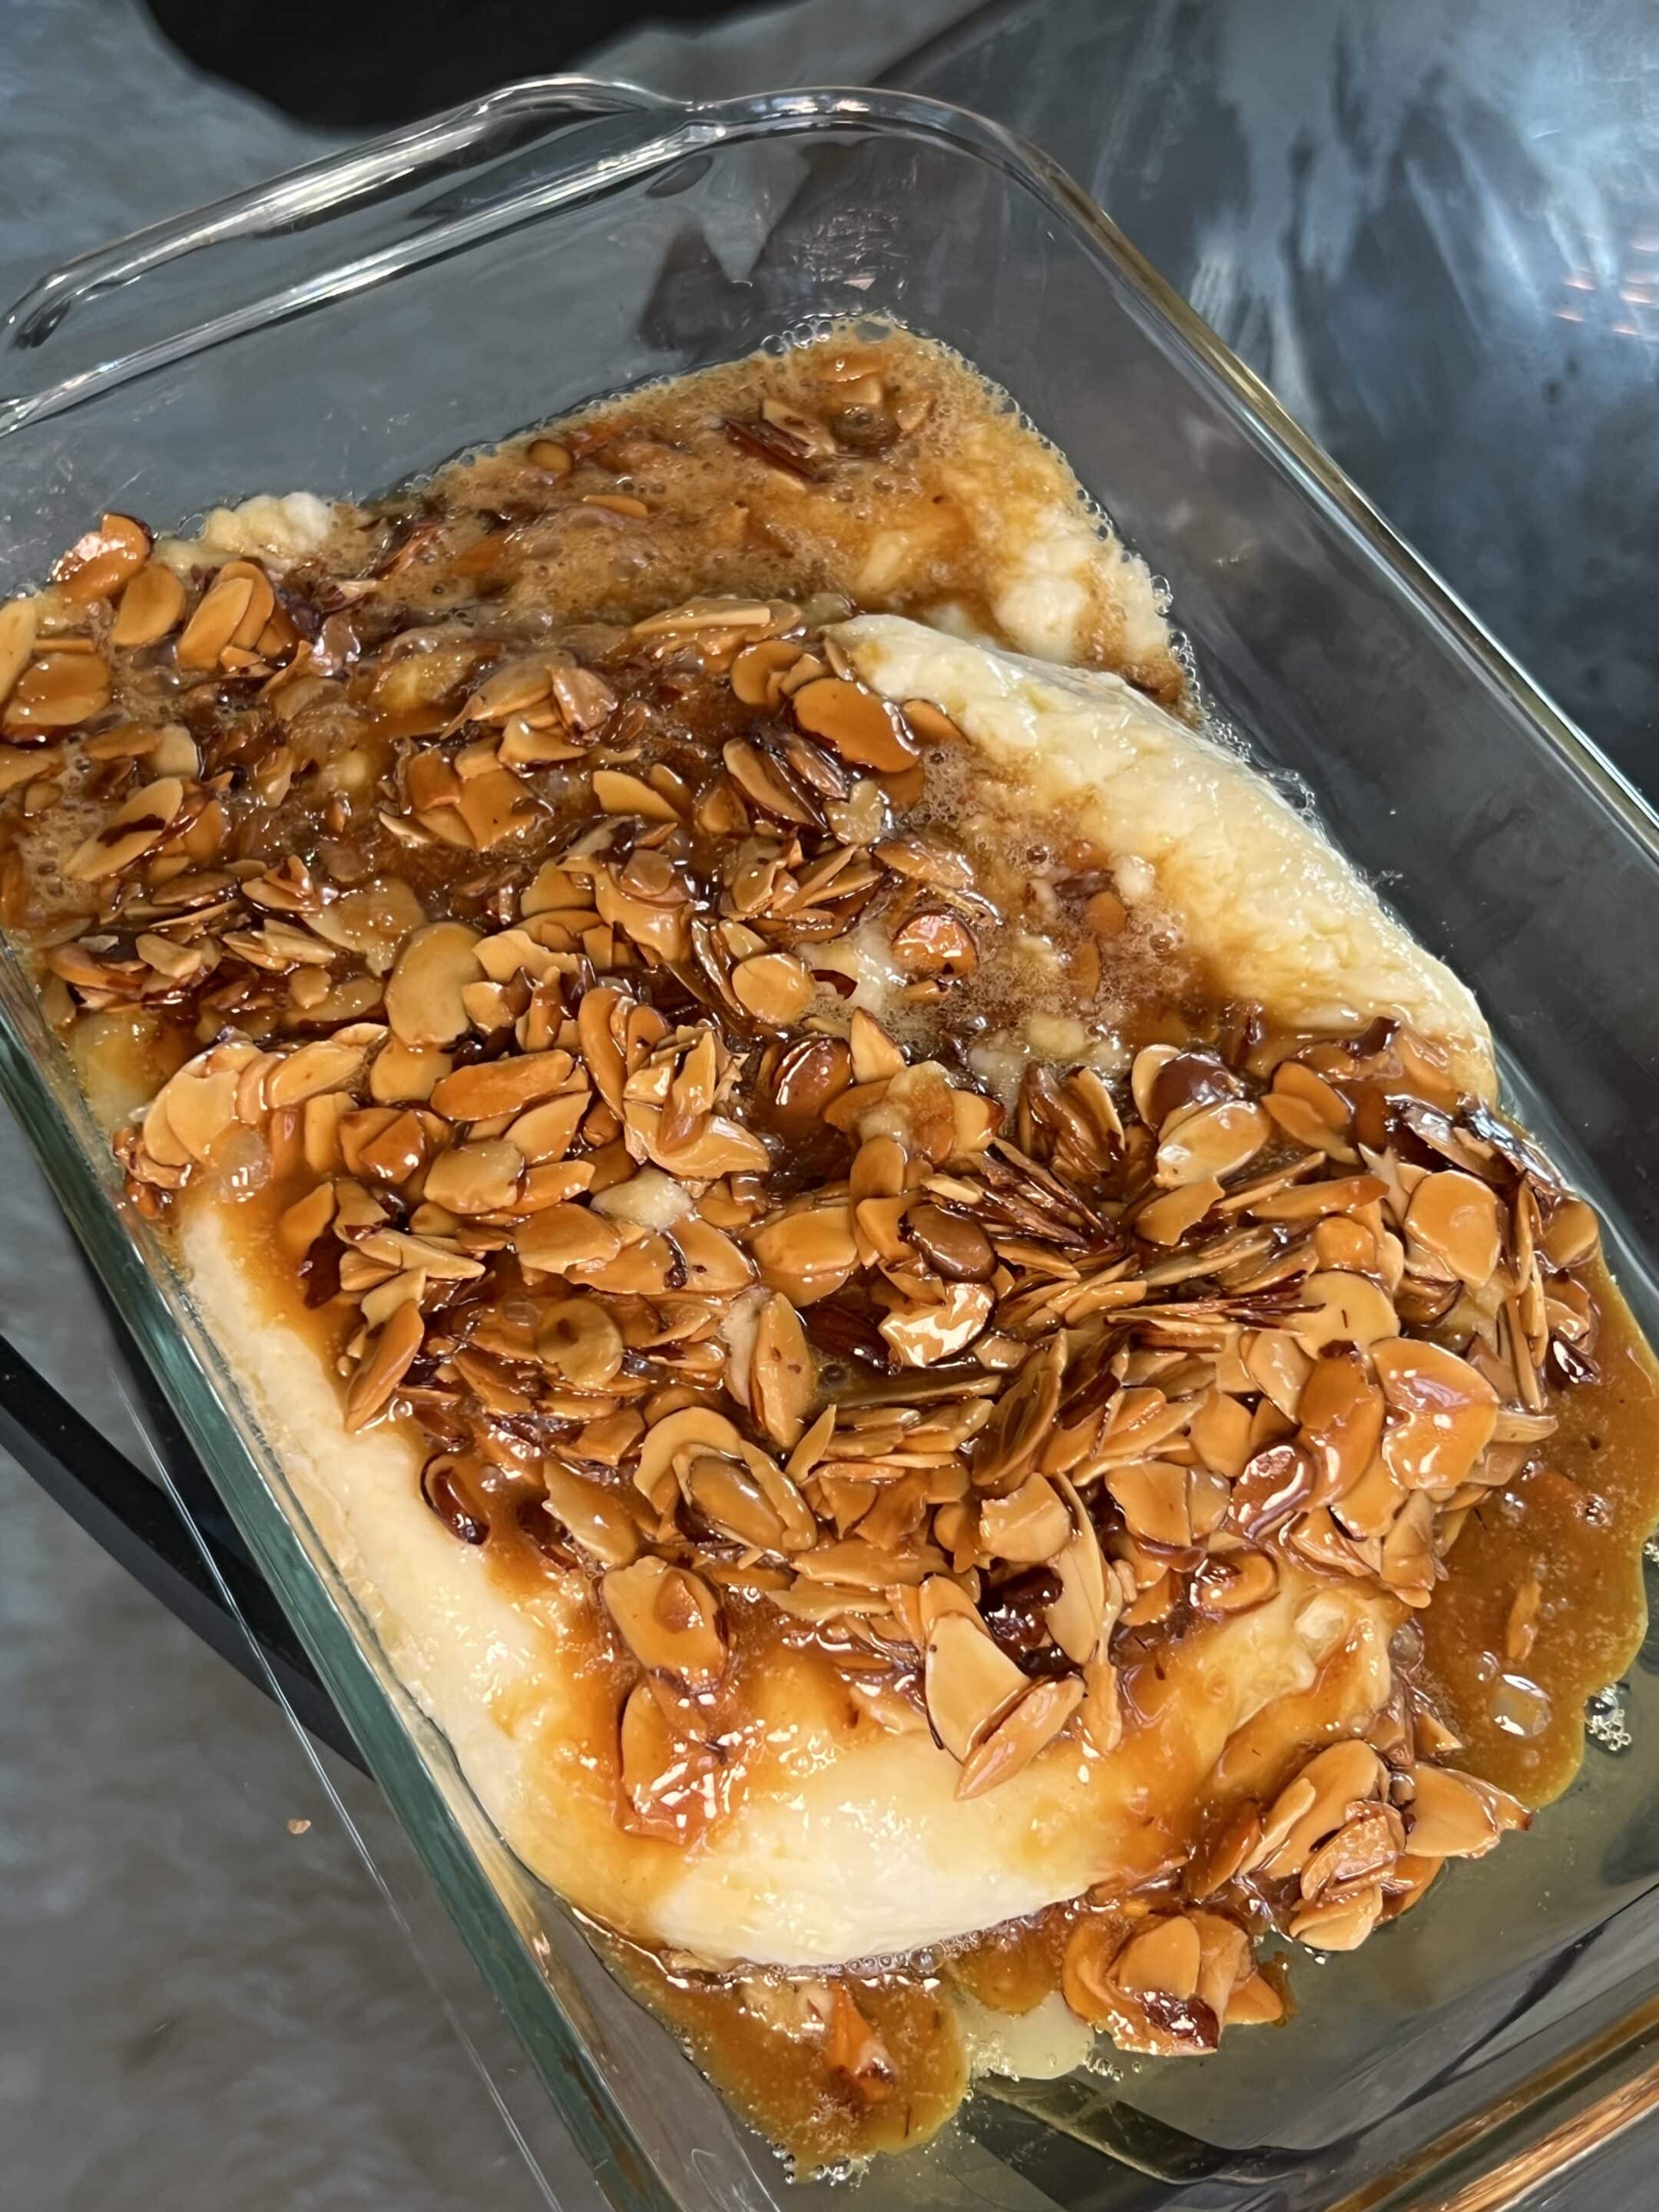 Almond Baked Brie